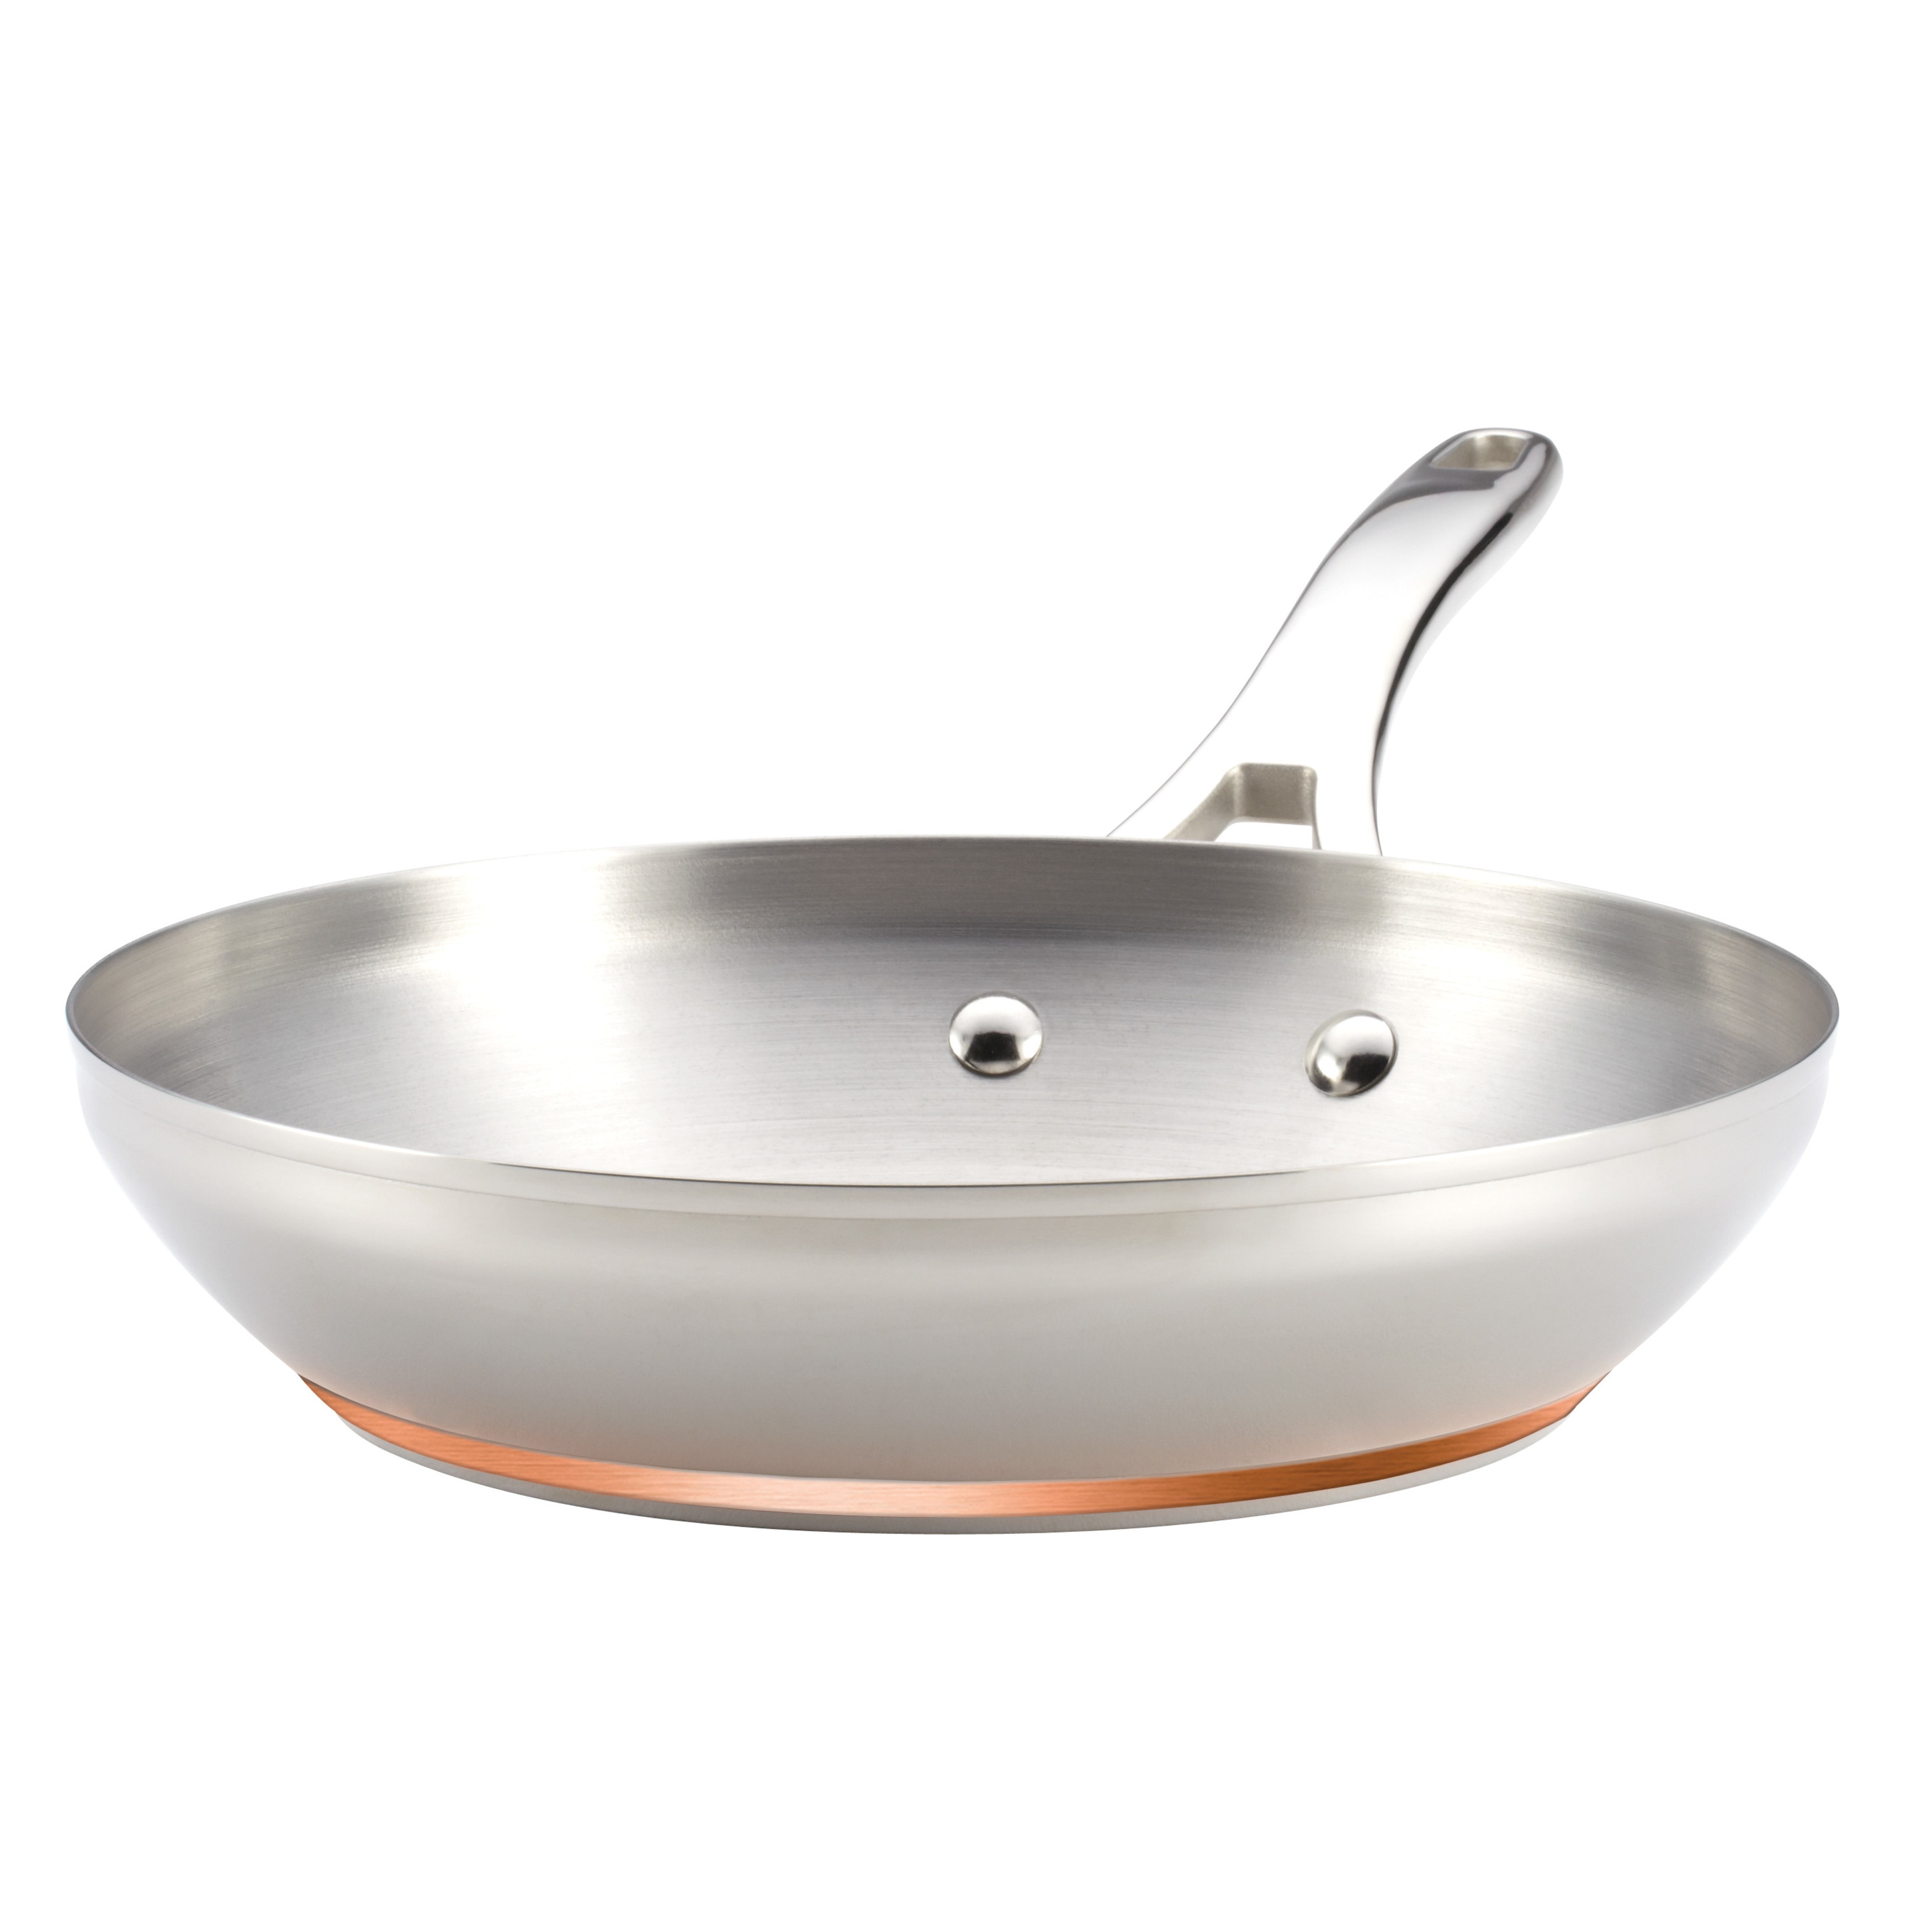 https://ak1.ostkcdn.com/images/products/10641507/Anolon-r-Nouvelle-Copper-Stainless-Steel-Twin-Pack-8-Inch-and-9-1-2-Inch-French-Skillets-12f8fe8d-9274-42bf-9a16-1a2dc311f0fe.jpg